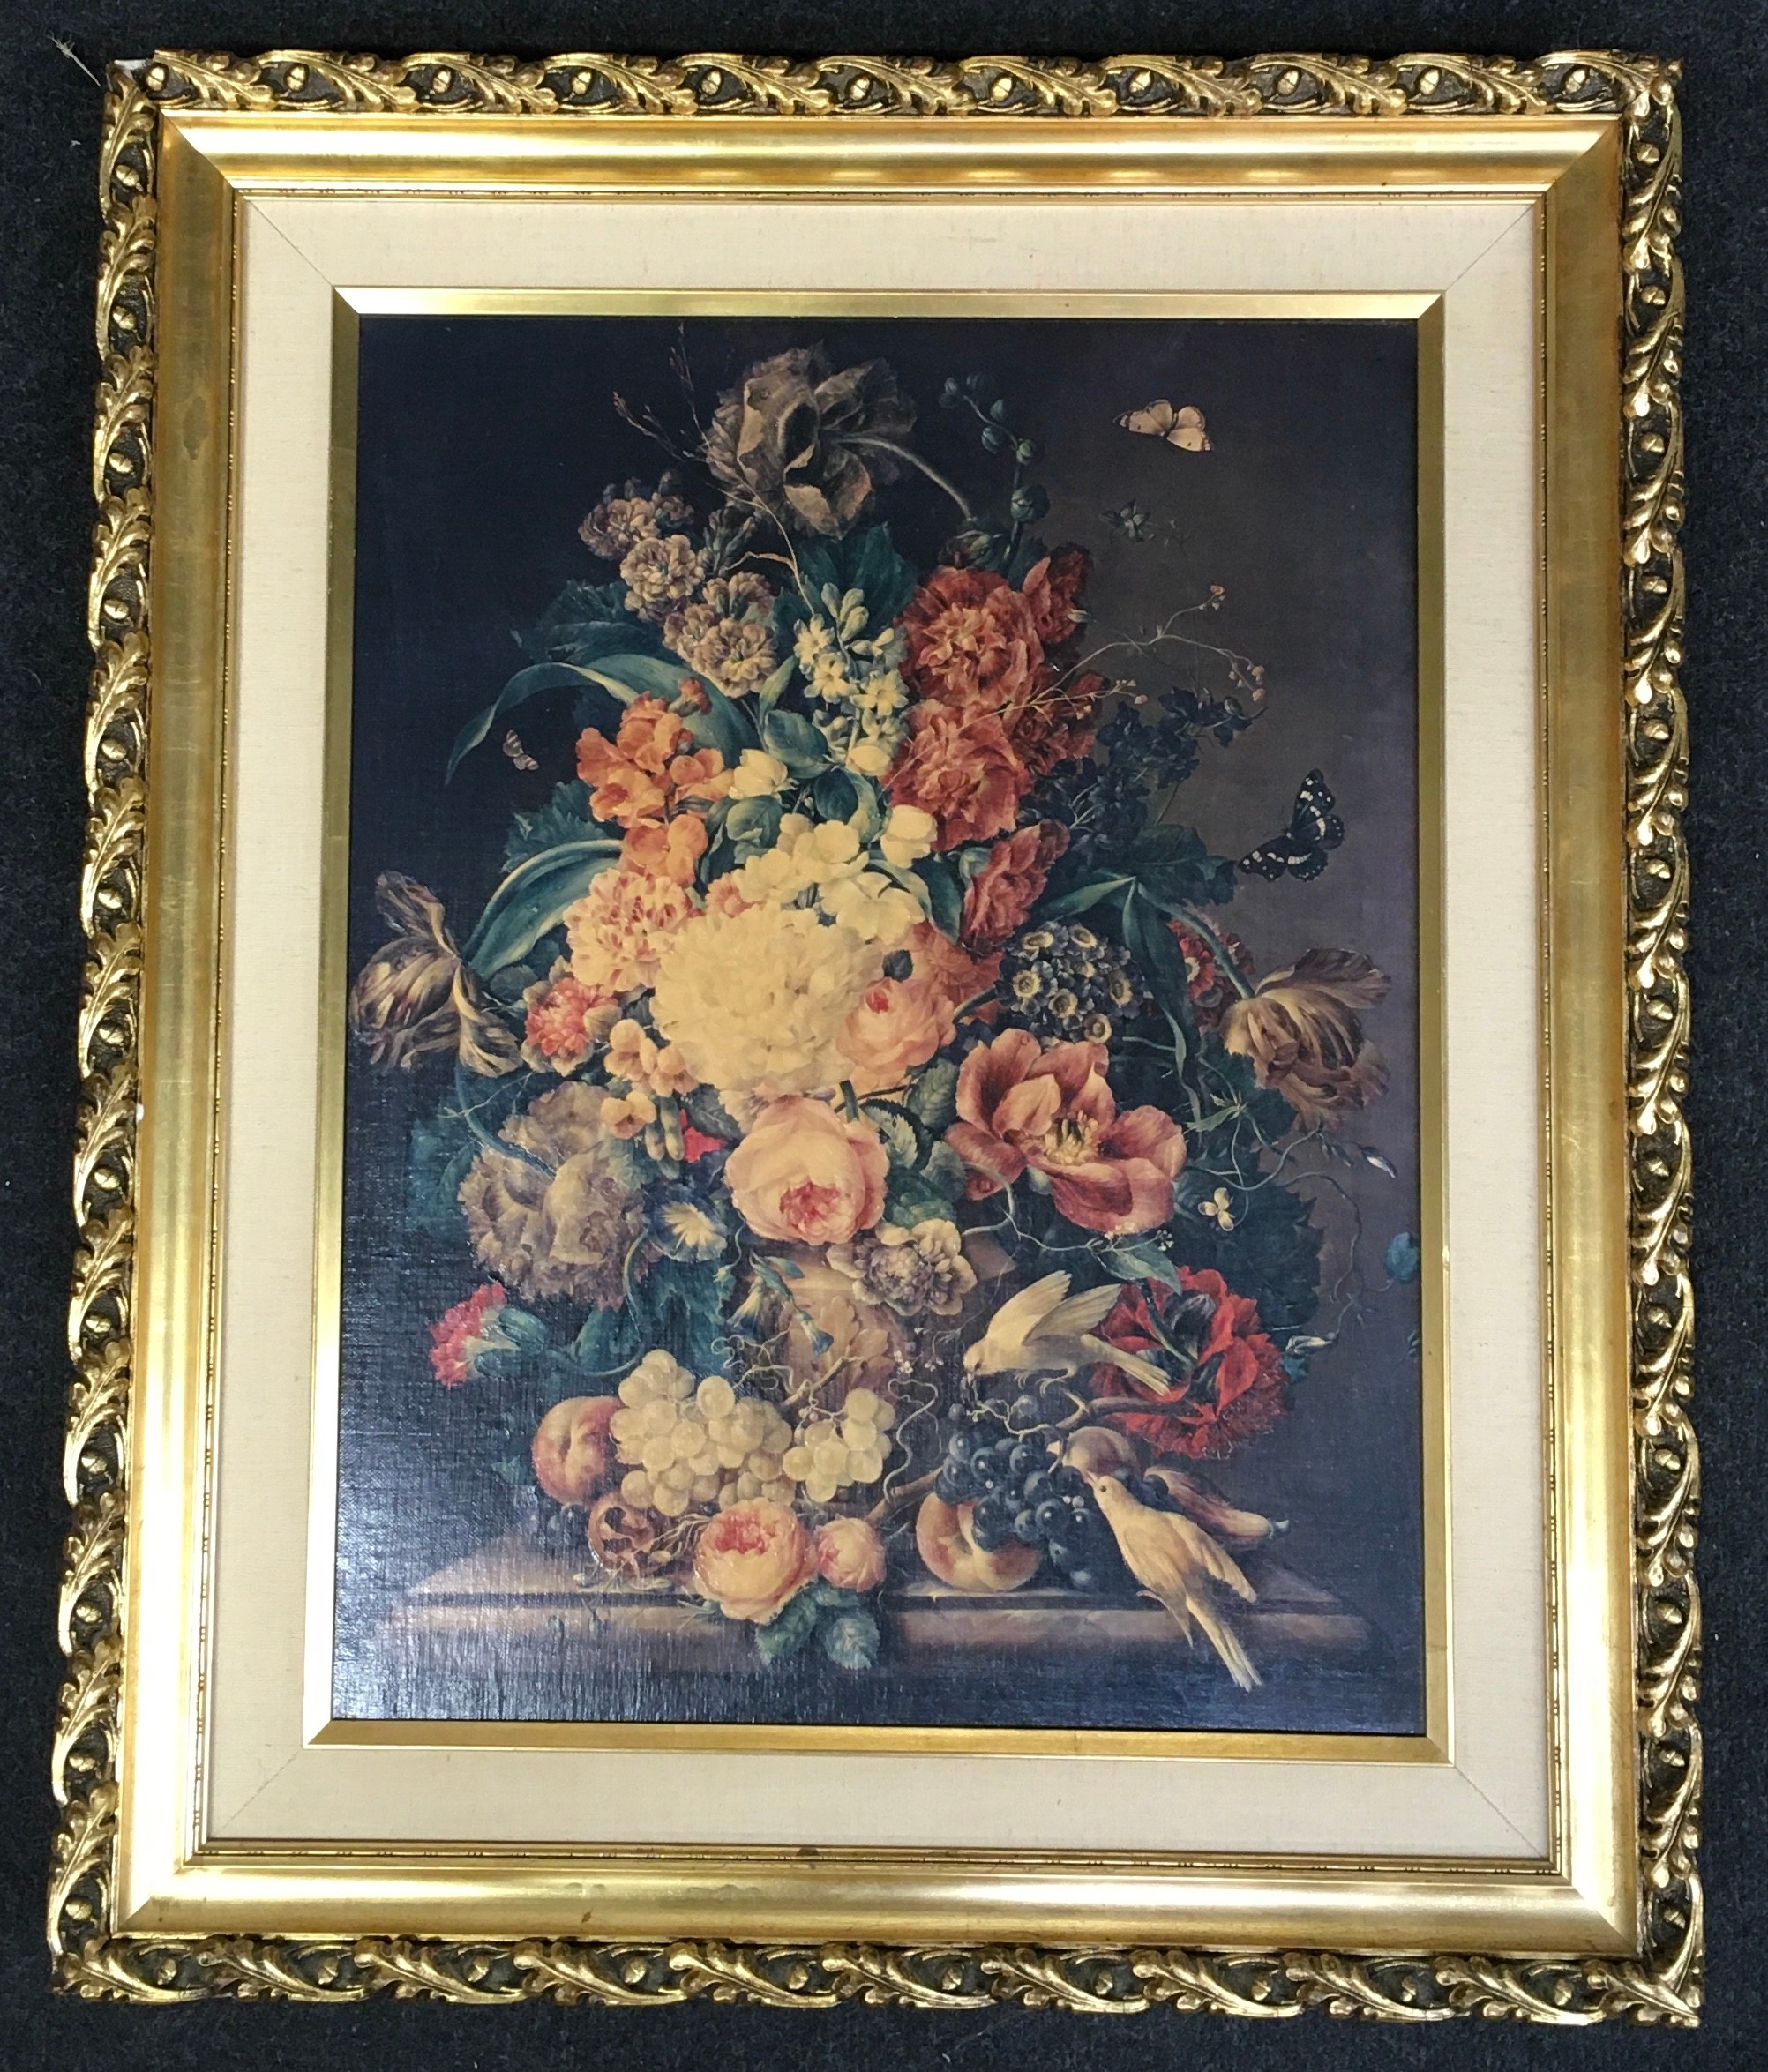 Gilt framed oil on canvas painting "Flowerpiece" by Petter (1791-1866) 61x74cm.